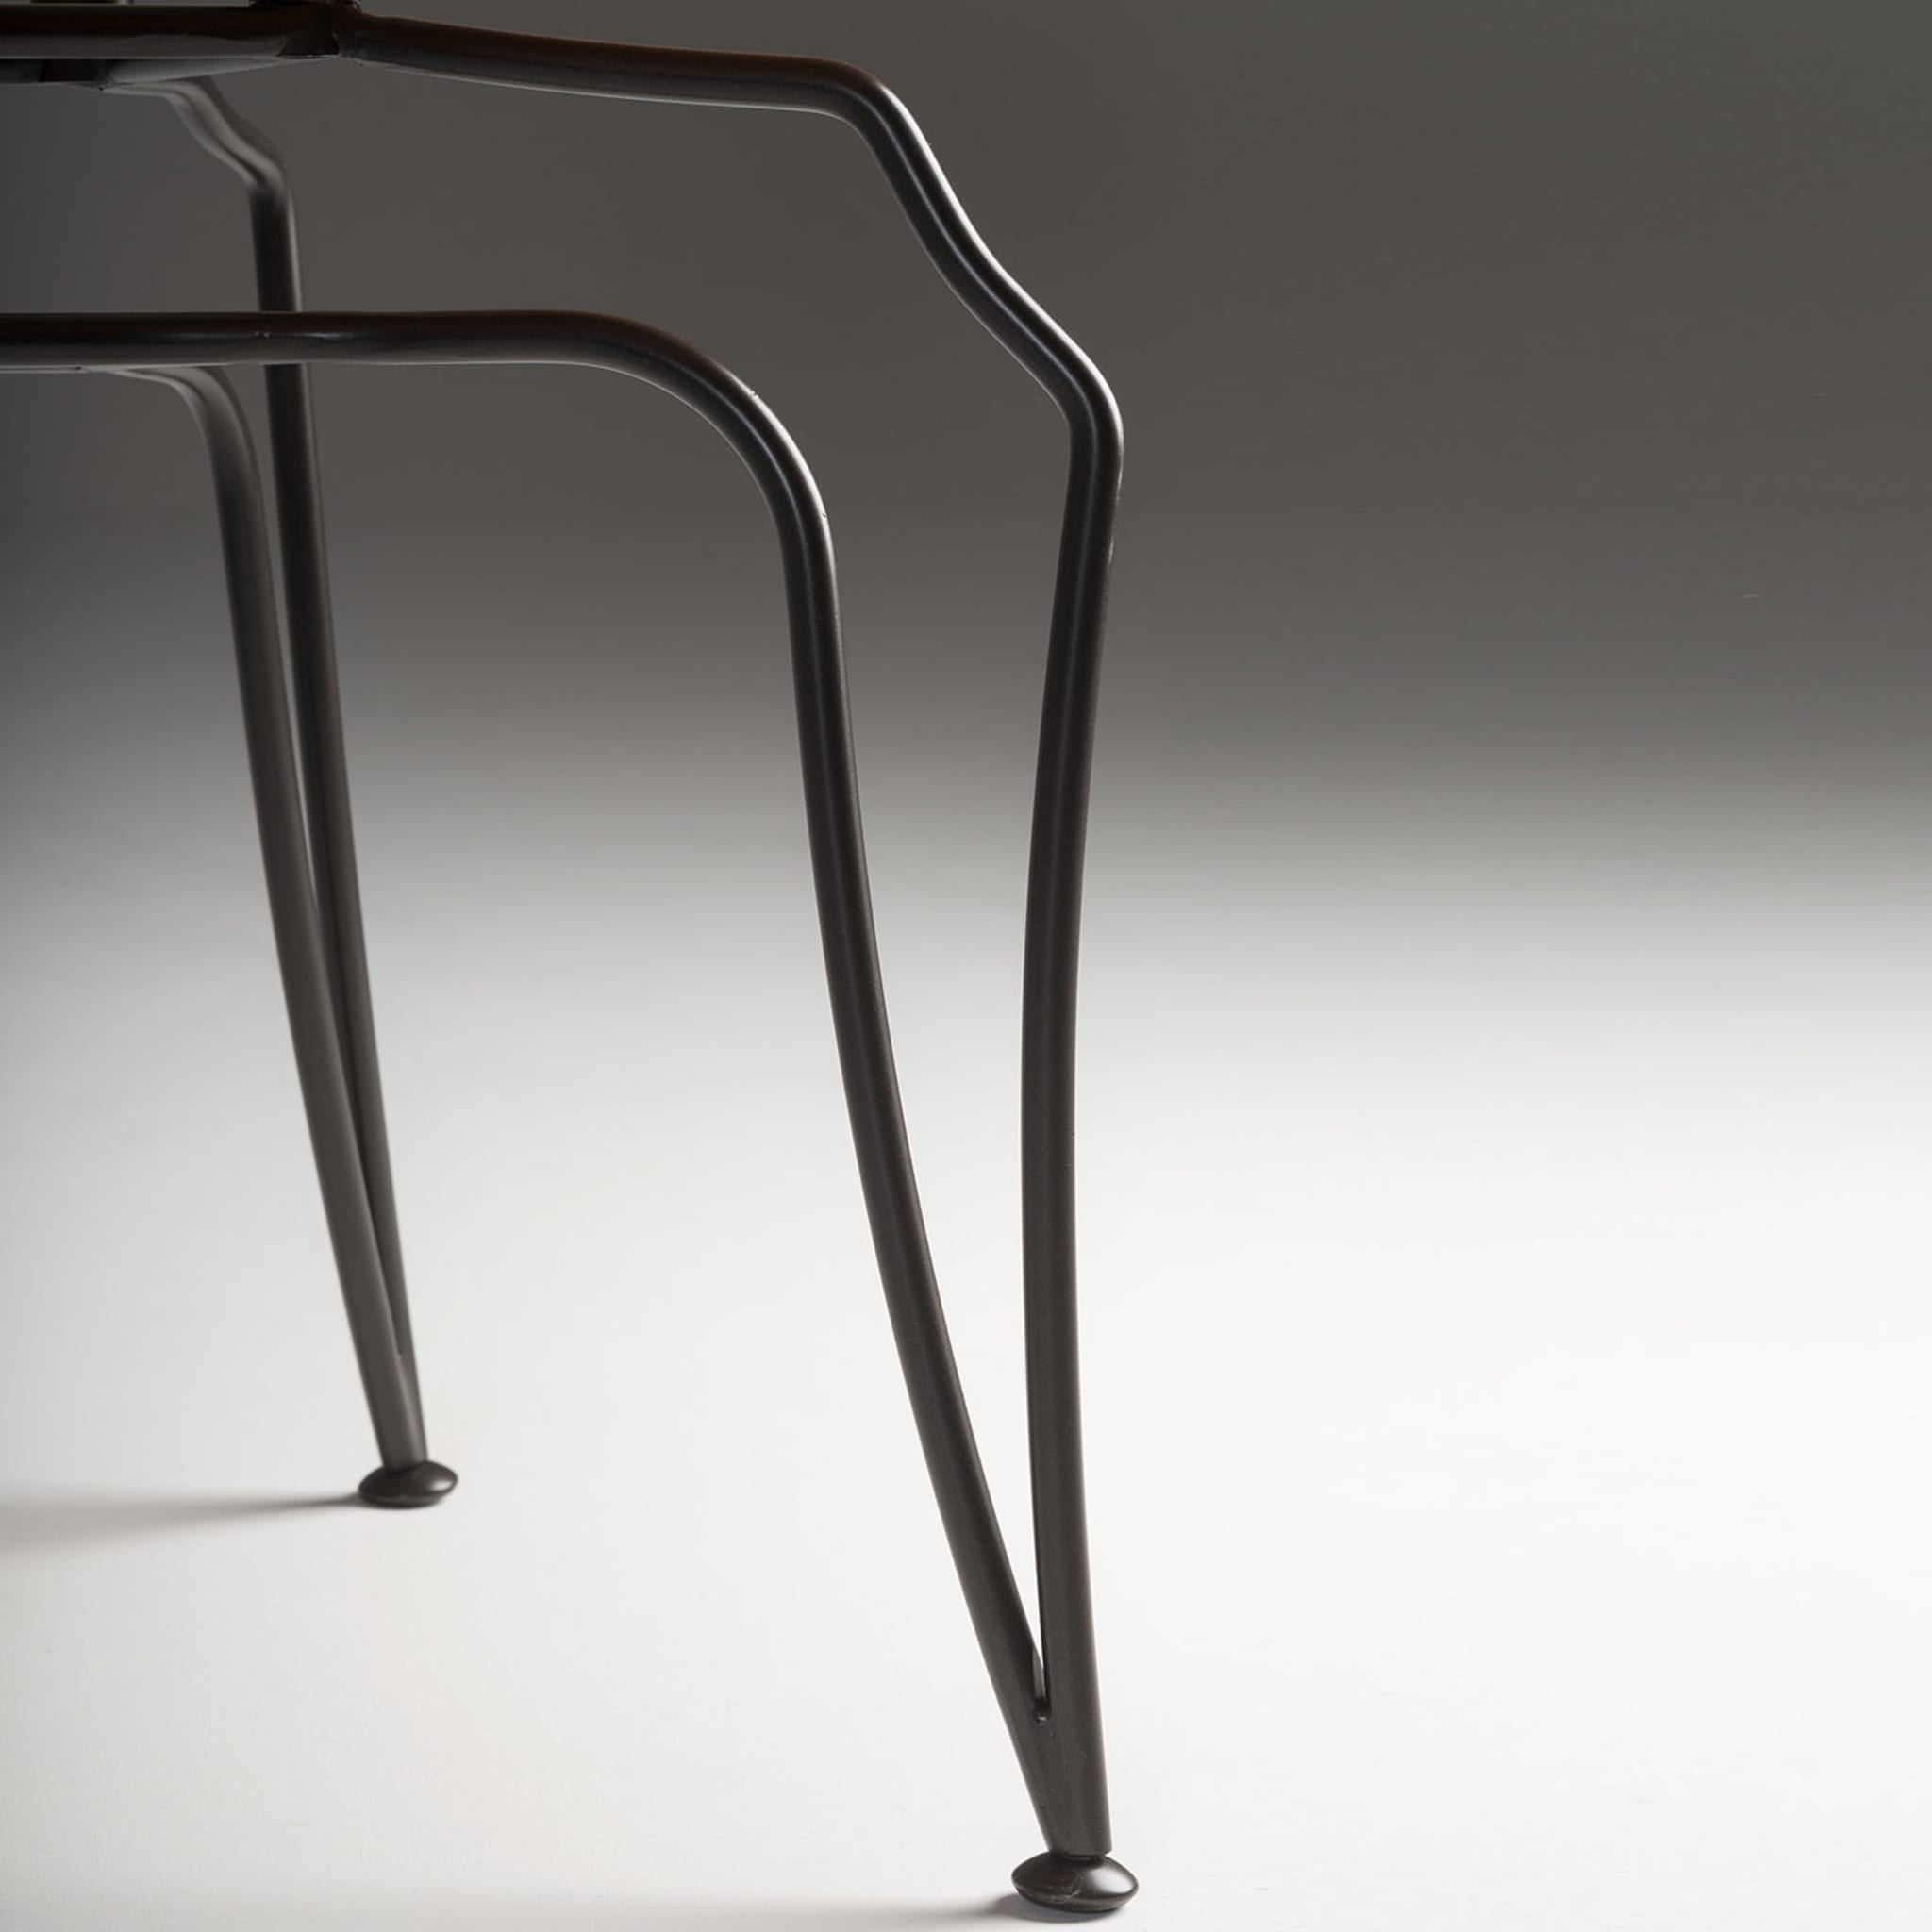 Jole Chair Tribeca Collection by Marco and Giulio Mantellassi - Alternative view 2